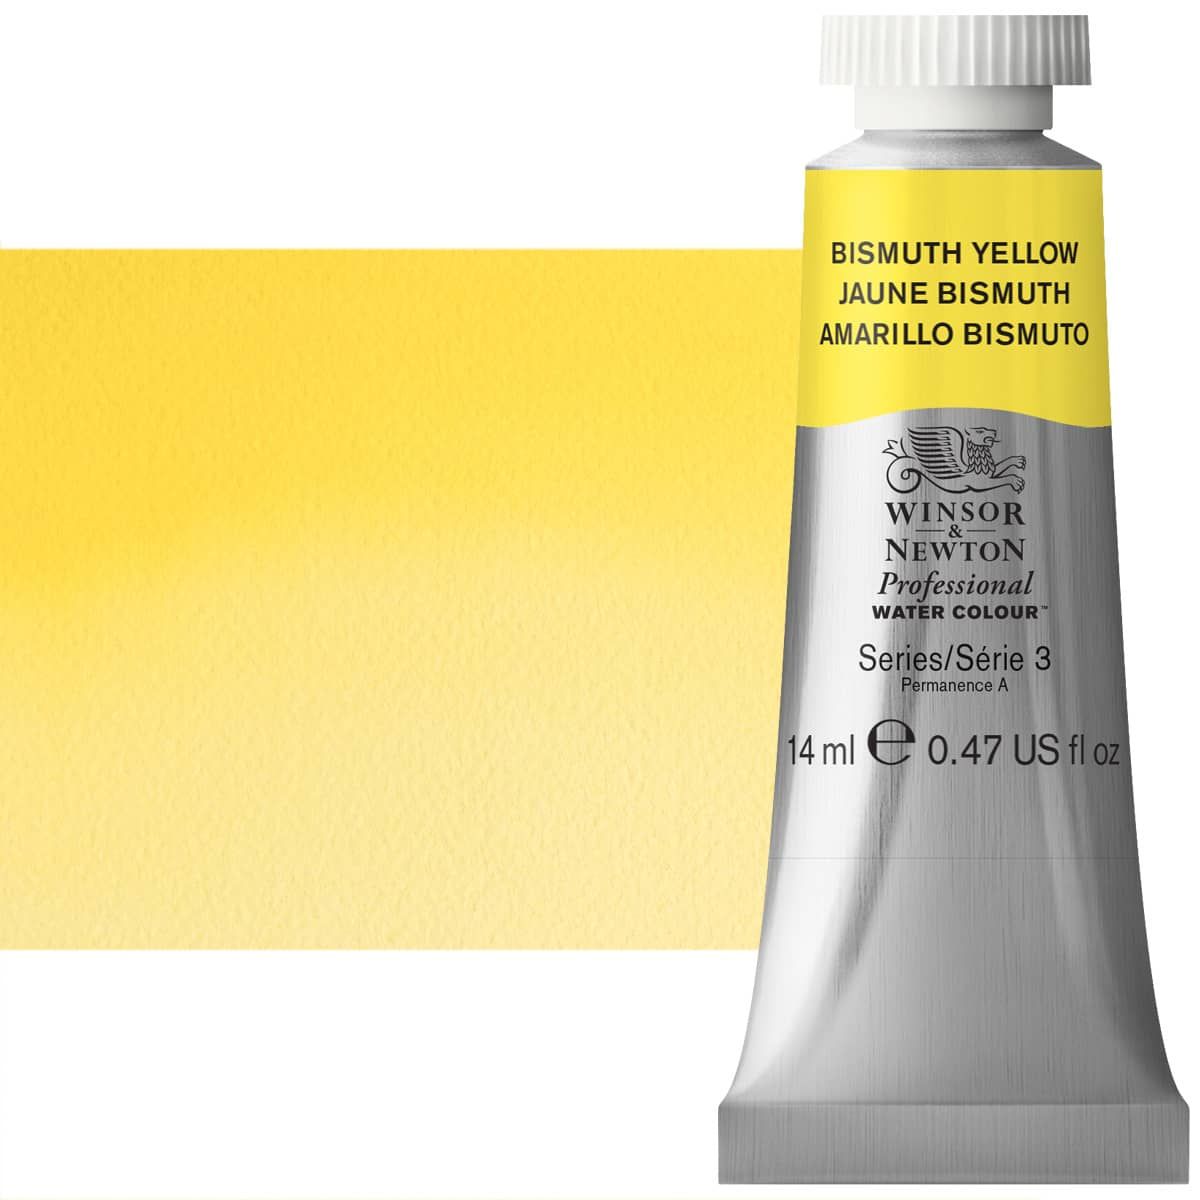 Winsor & Newton Professional Watercolor - Bismuth Yellow, 14ml Tube